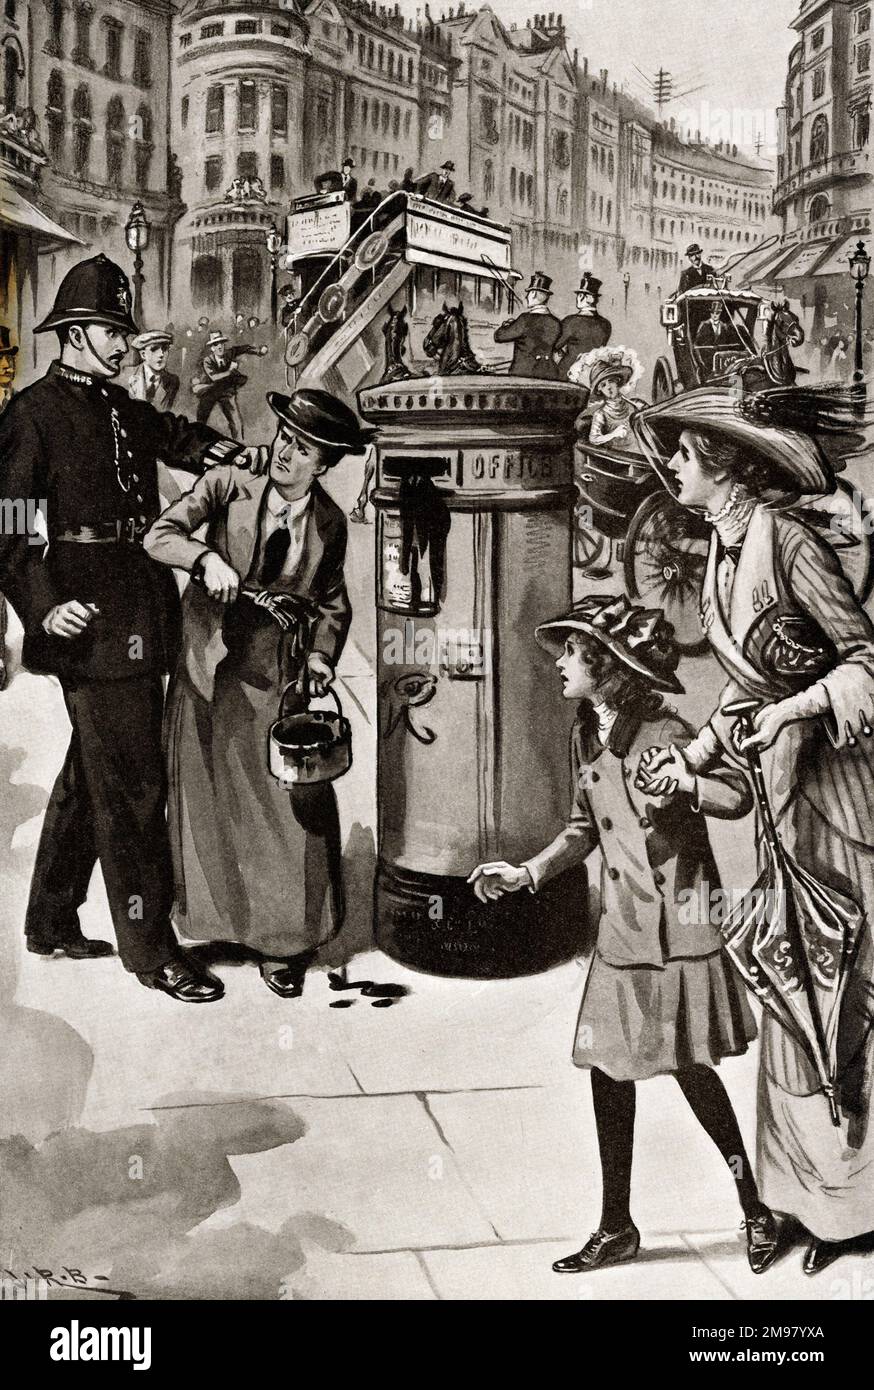 Illustration, Vicky sees a suffragette arrested. Stock Photo